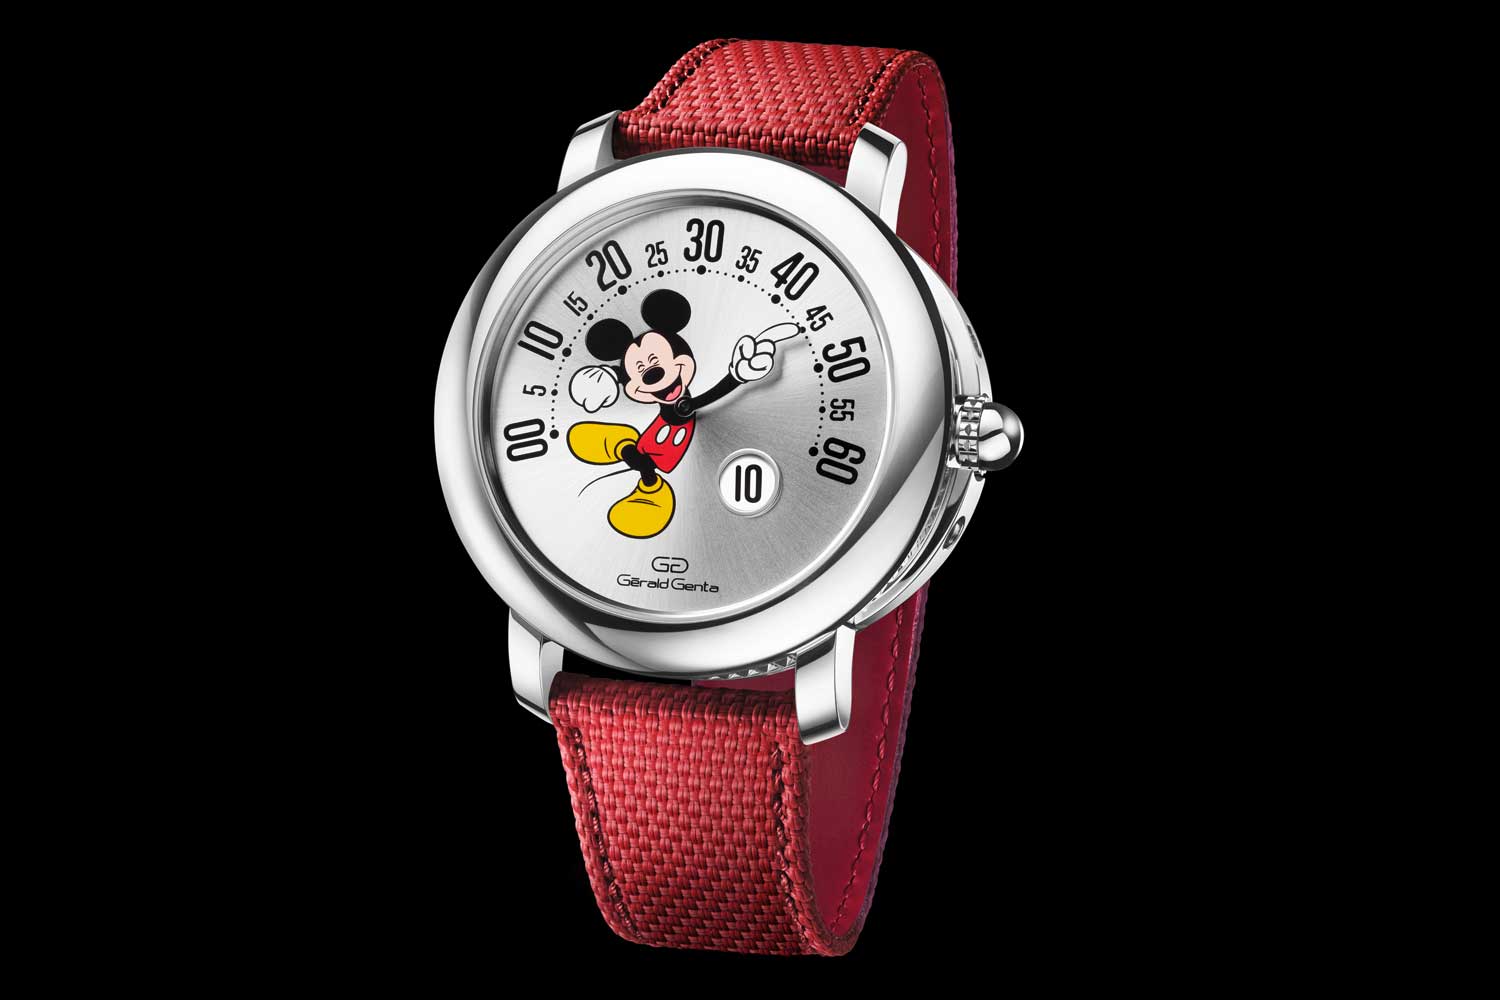 The Gerald Genta Arena Retro Mickey Mouse Disney is offered in a 41mm steel case, featuring Mickey on a rhodium-plated sunburst dial joyously kicking up his heels and pointing out the minutes with his retrograde hand